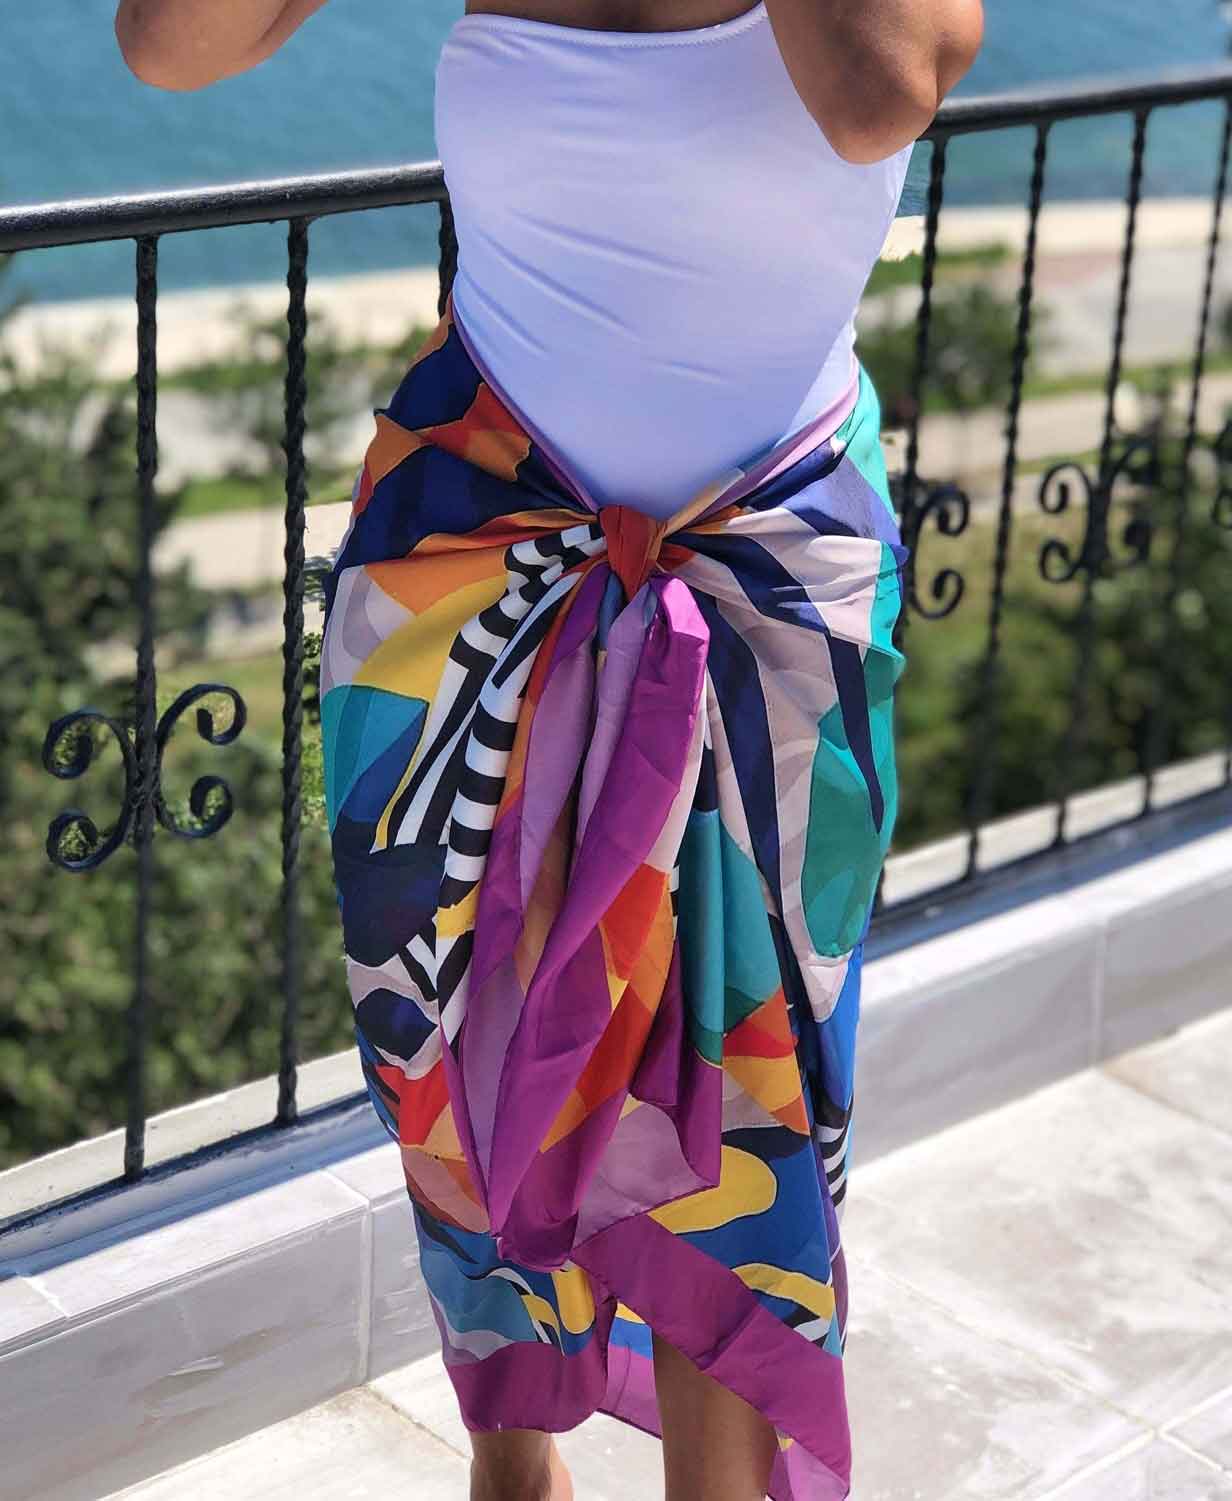 Long Multicolor Scarf, All Season Scarf, Colorful Scarf, Cover Up Scarf, Cotton Beach Wrap, Colorful Pattern Pink Green Orange Blue Scarf